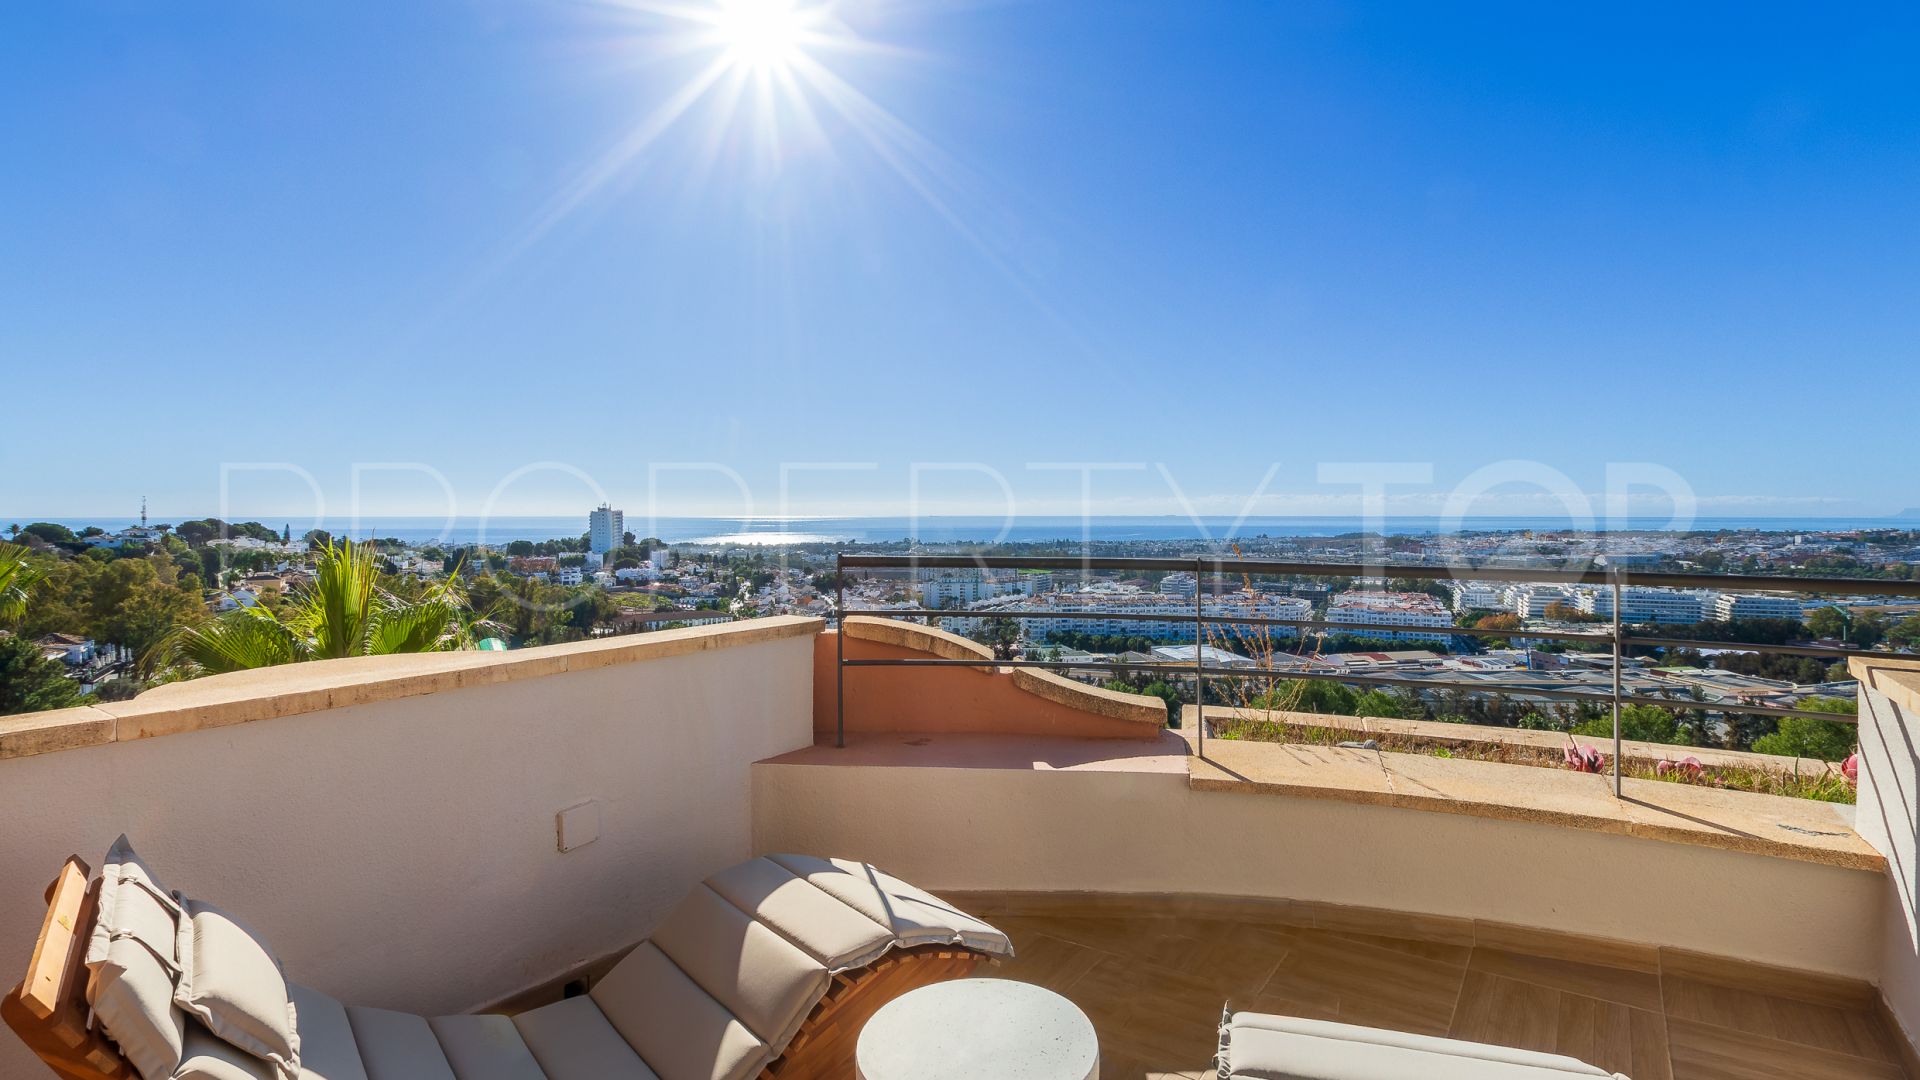 Magna Marbella 3 bedrooms apartment for sale